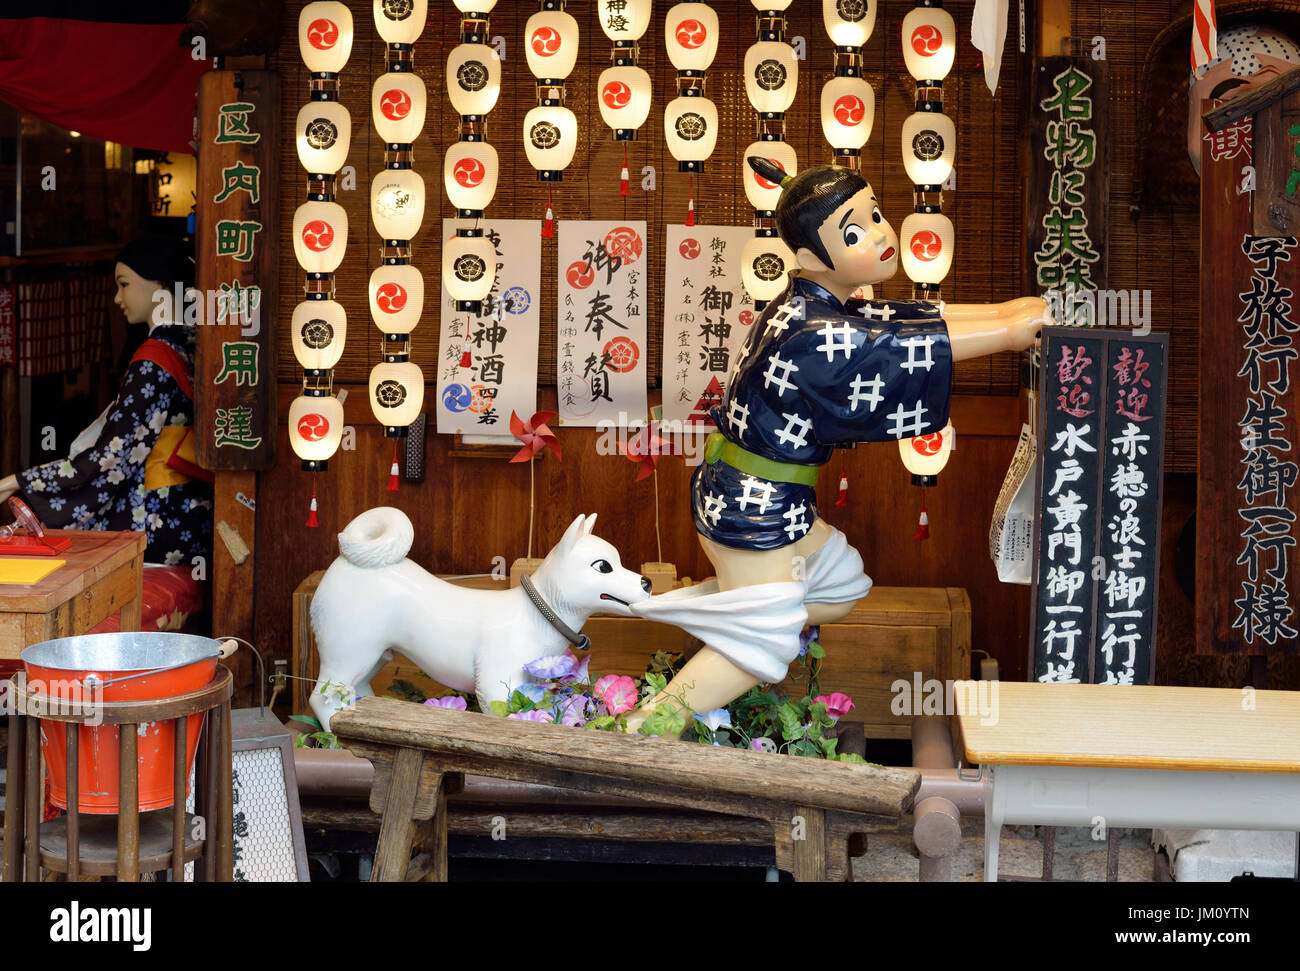 KYOTO, JAPAN - July 24, 2017: A colorful and humorous display of a delivery boy being attacked by a dog in front of the Issen Yoshoku Restaurant Stock Photo